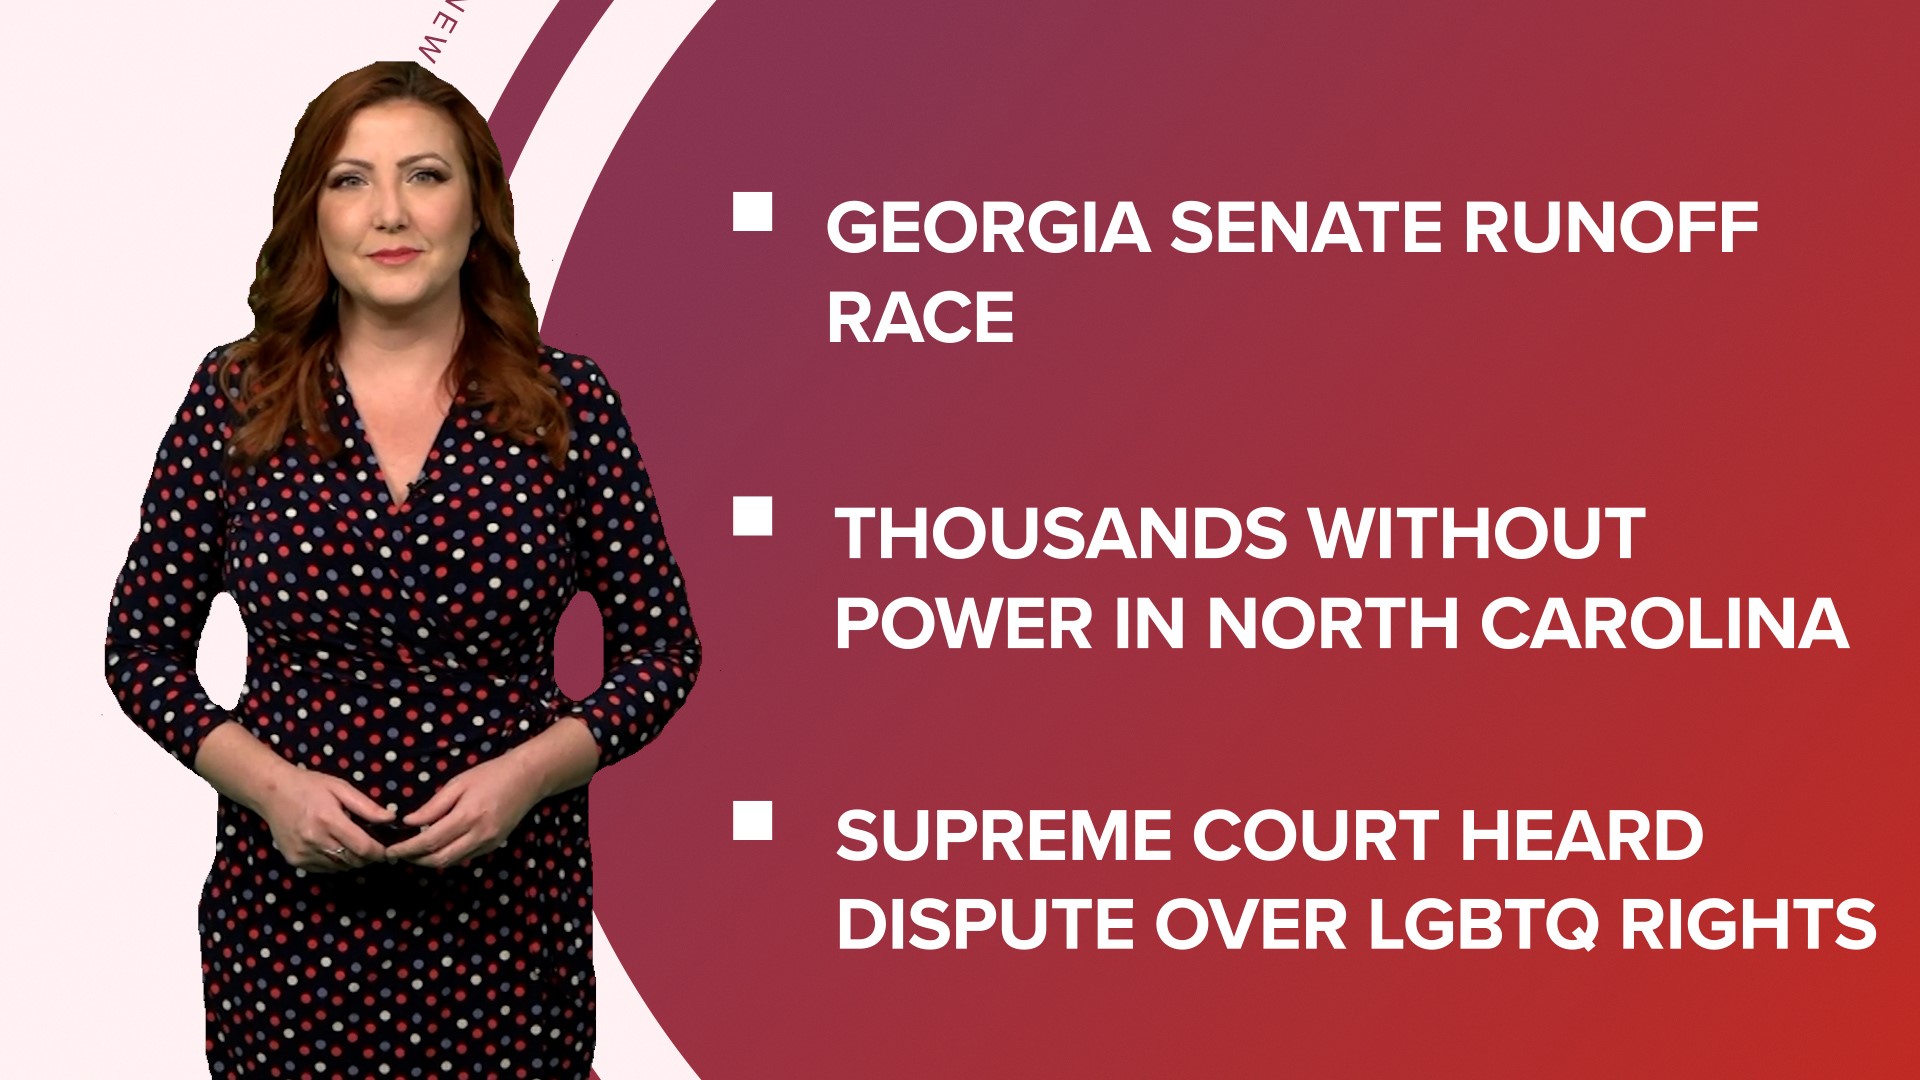 A look at what is happening in the news from Georgia's Senate runoff race to come to an end today to the Supreme Court hearing a case on LGBTQ rights.